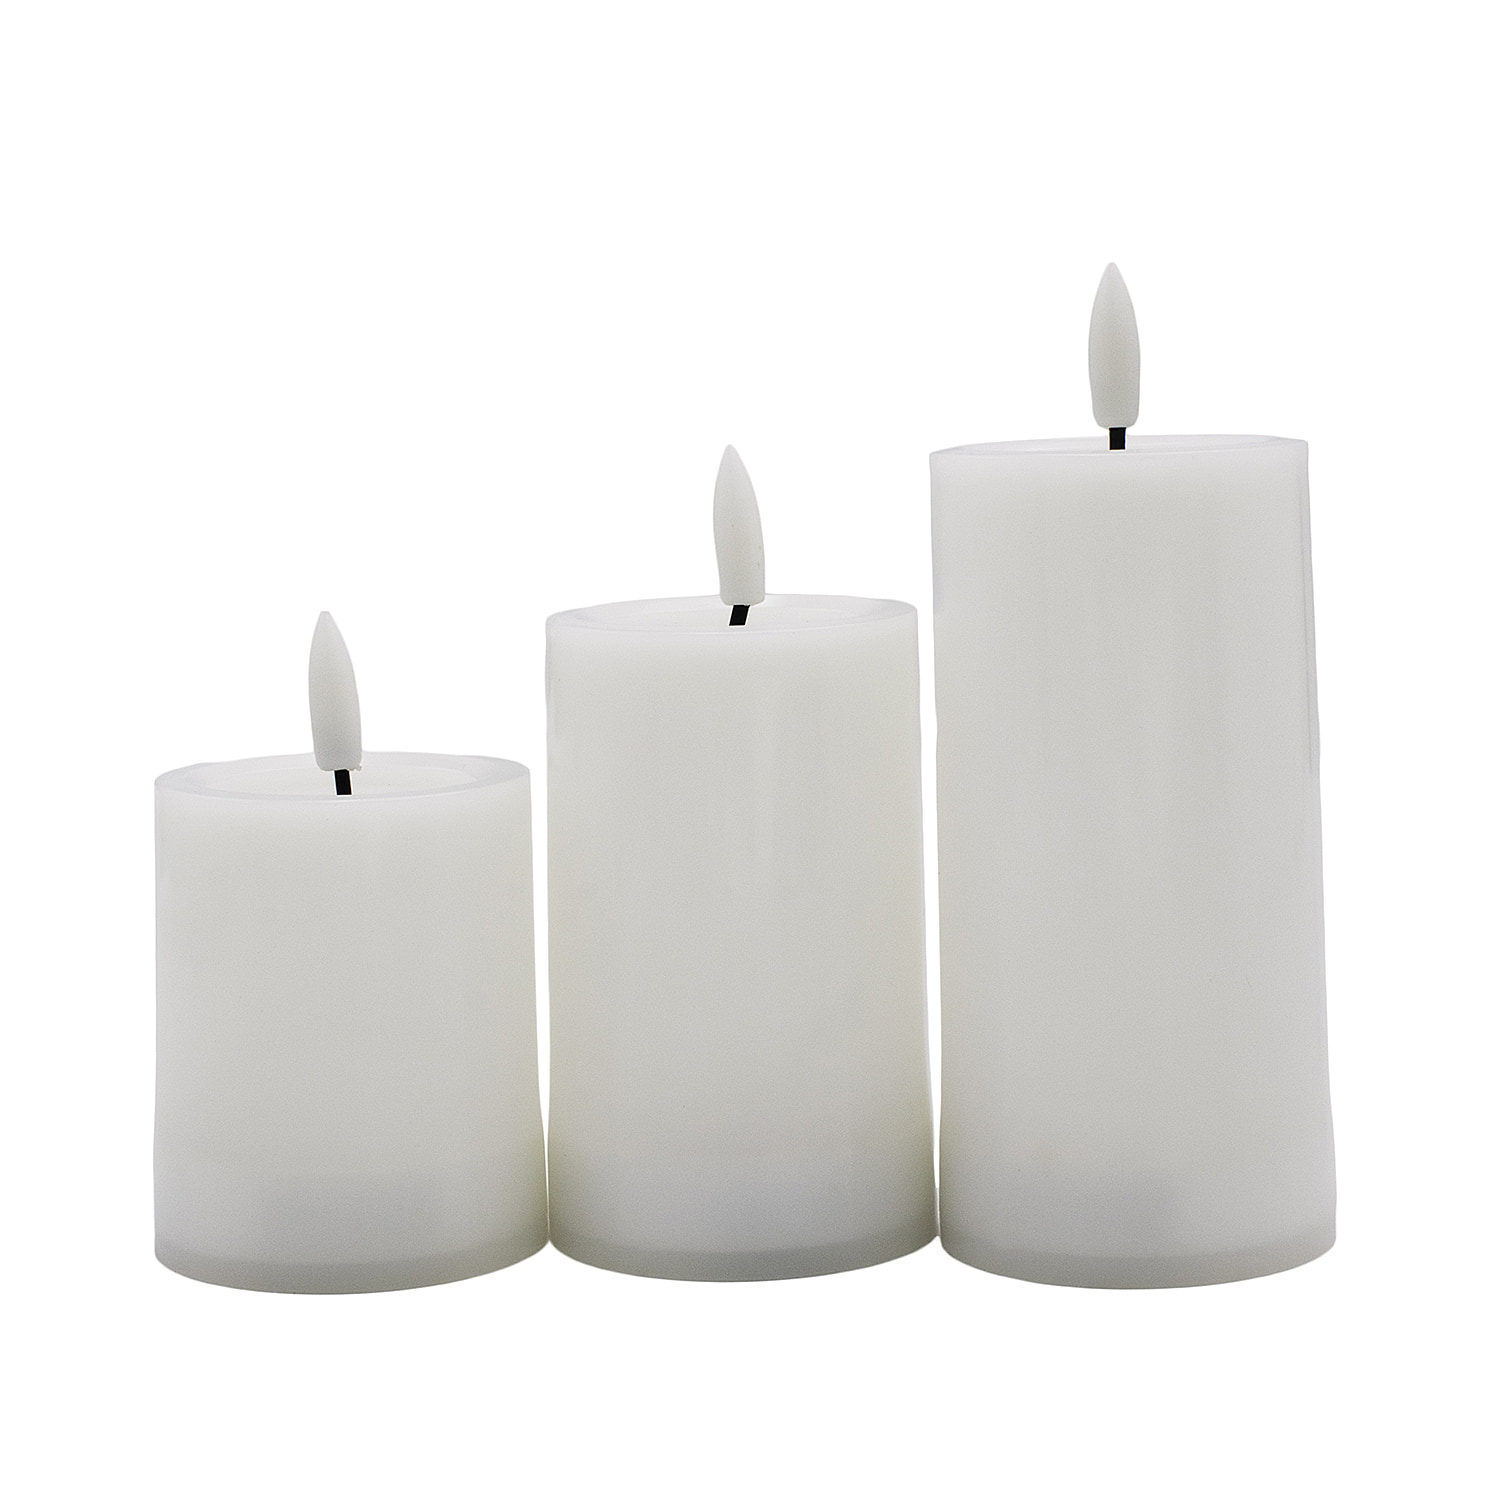 Set of 3 Plastic Candles featuring a realistic black wick flame